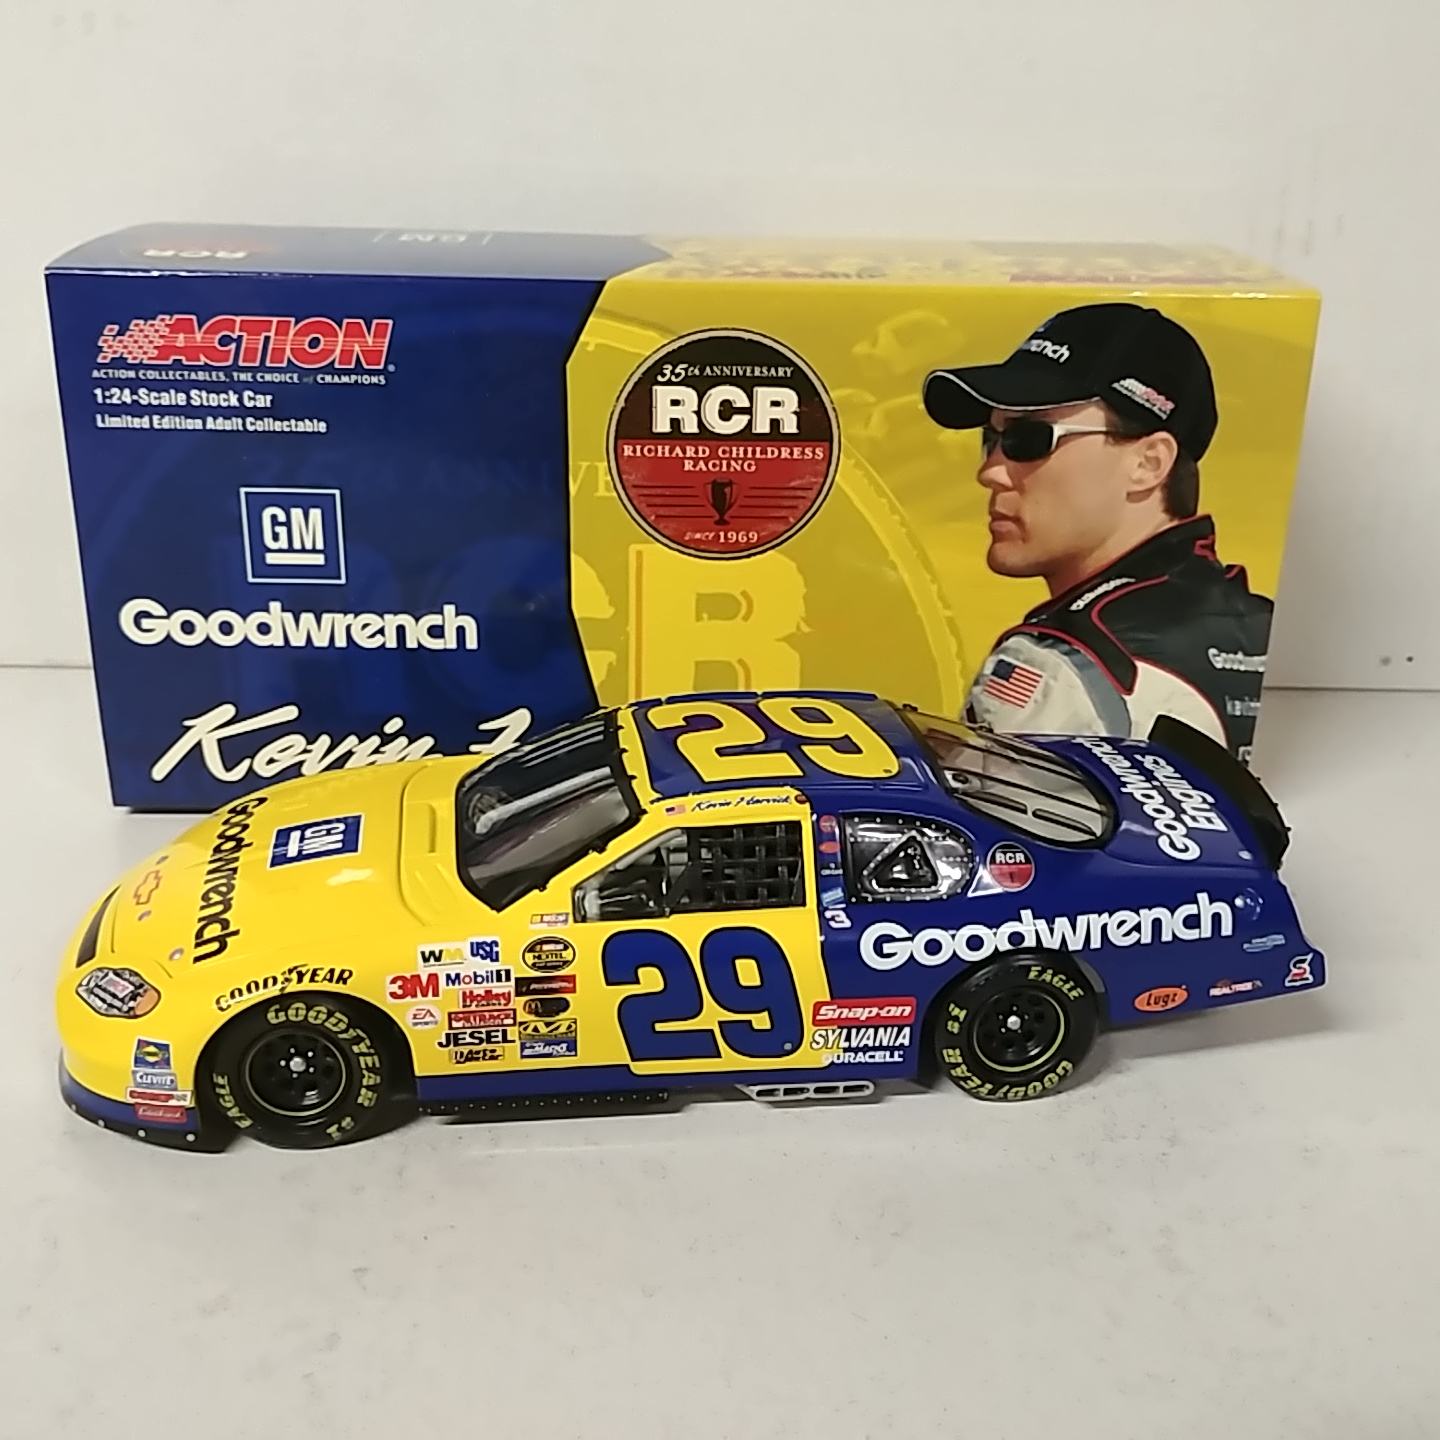 2004 Kevin Harvick 1/24th GM Goodwrench "RCR 35th Anniversary" c/w car